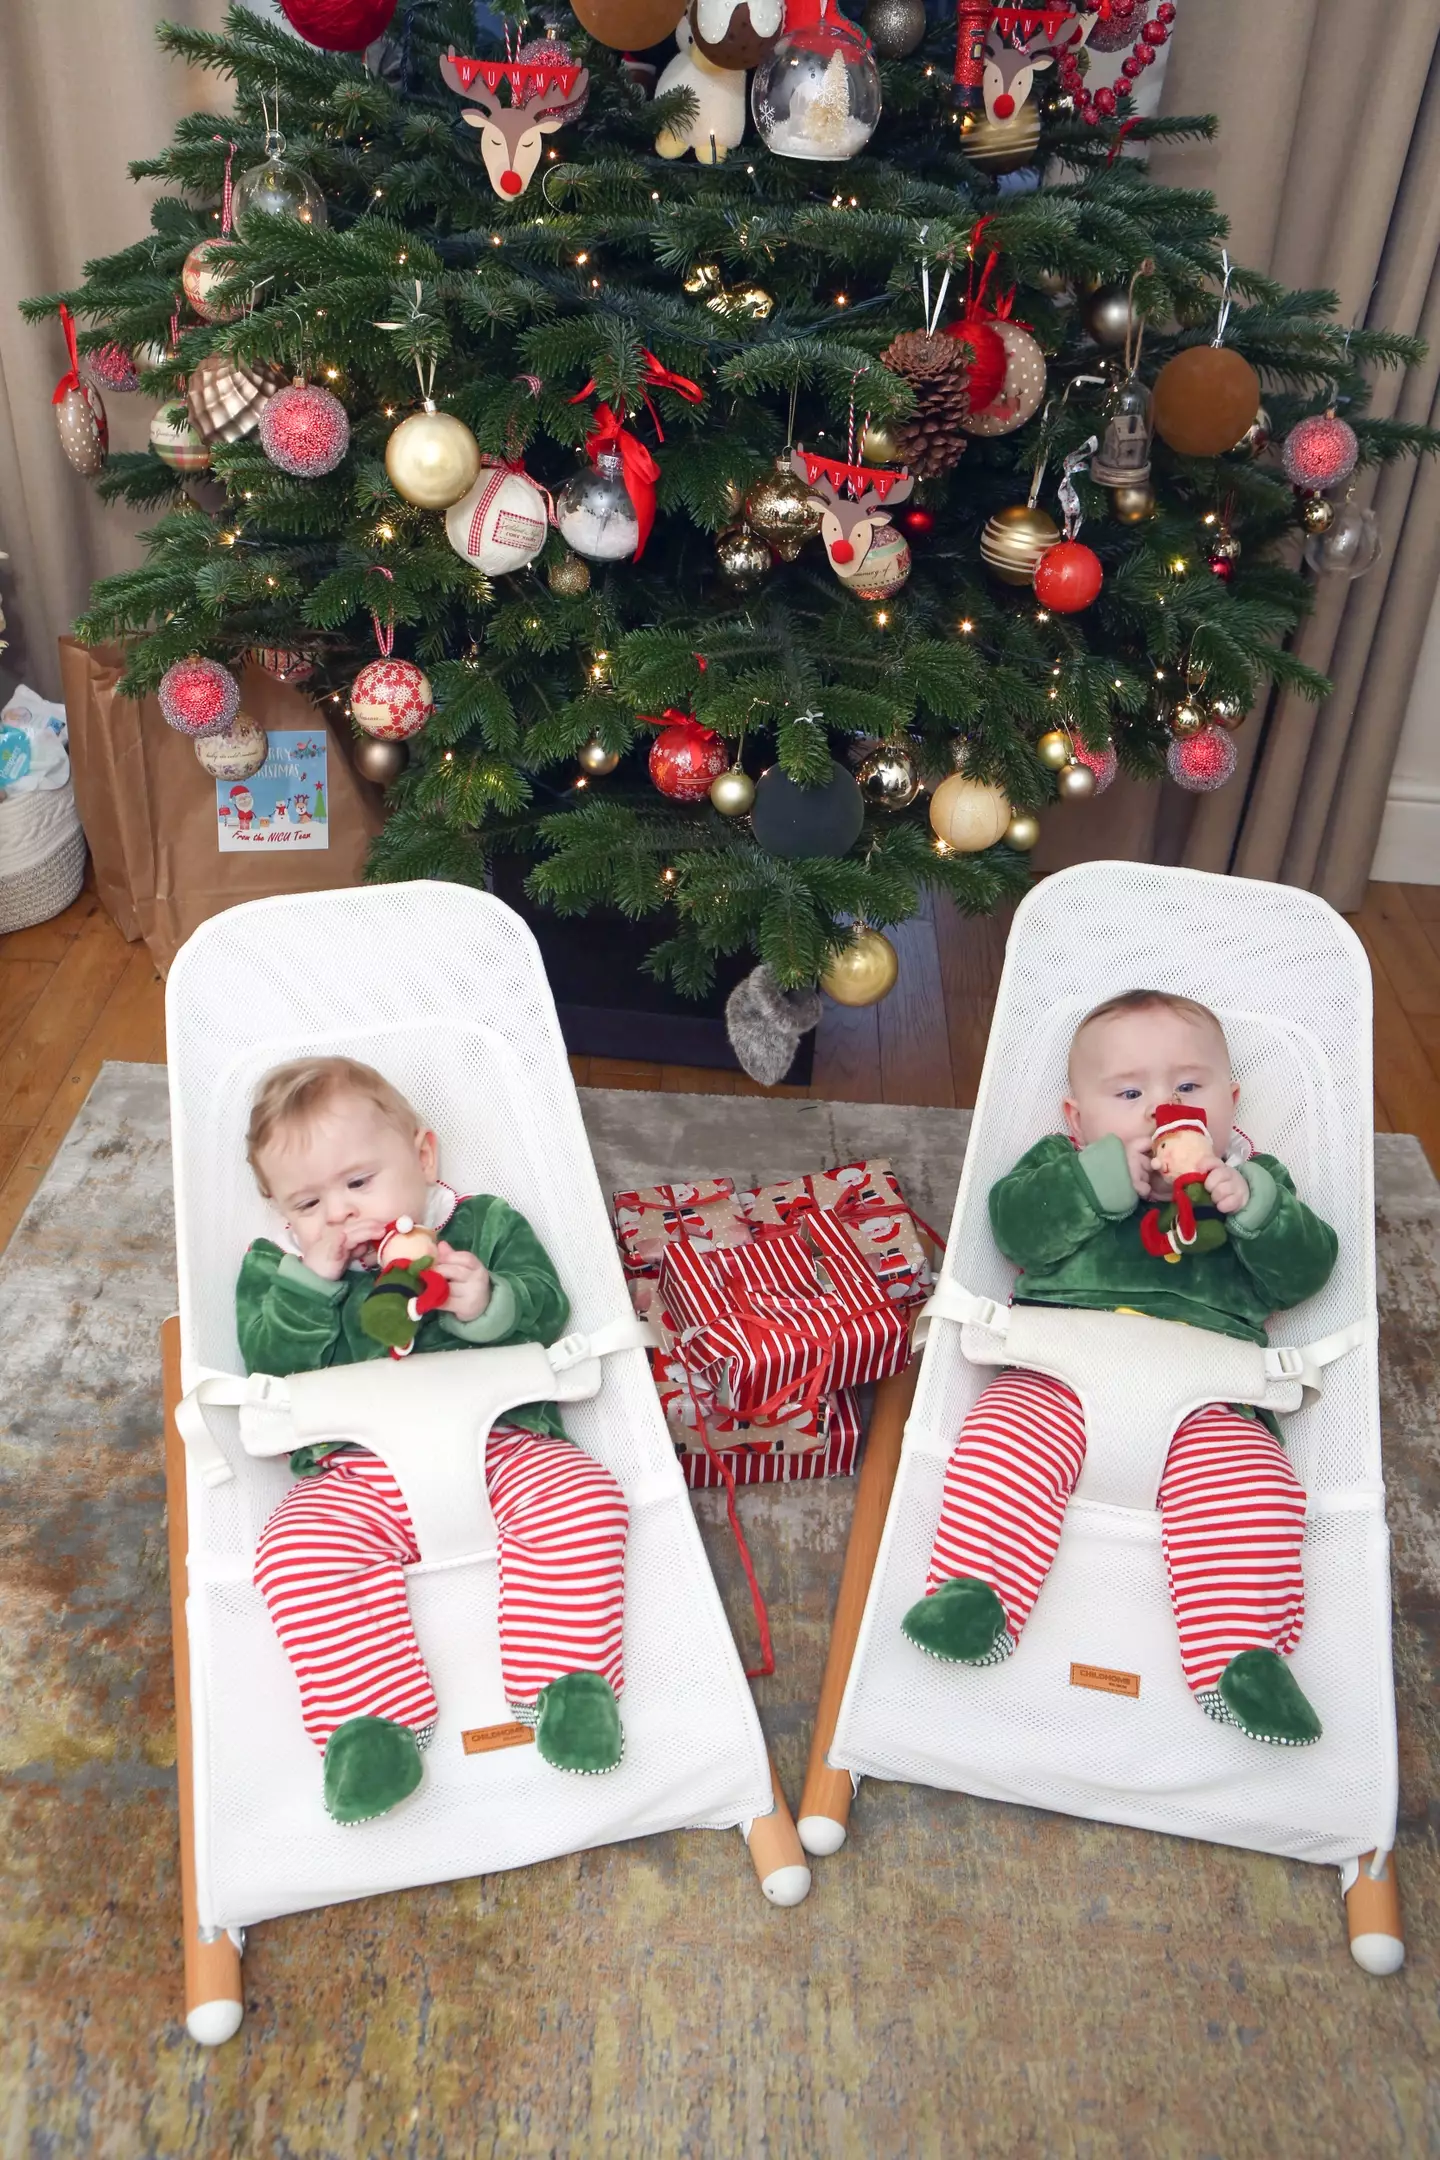 14 months on from their birth and the twins are ready to celebrate Christmas at home in Derbyshire.